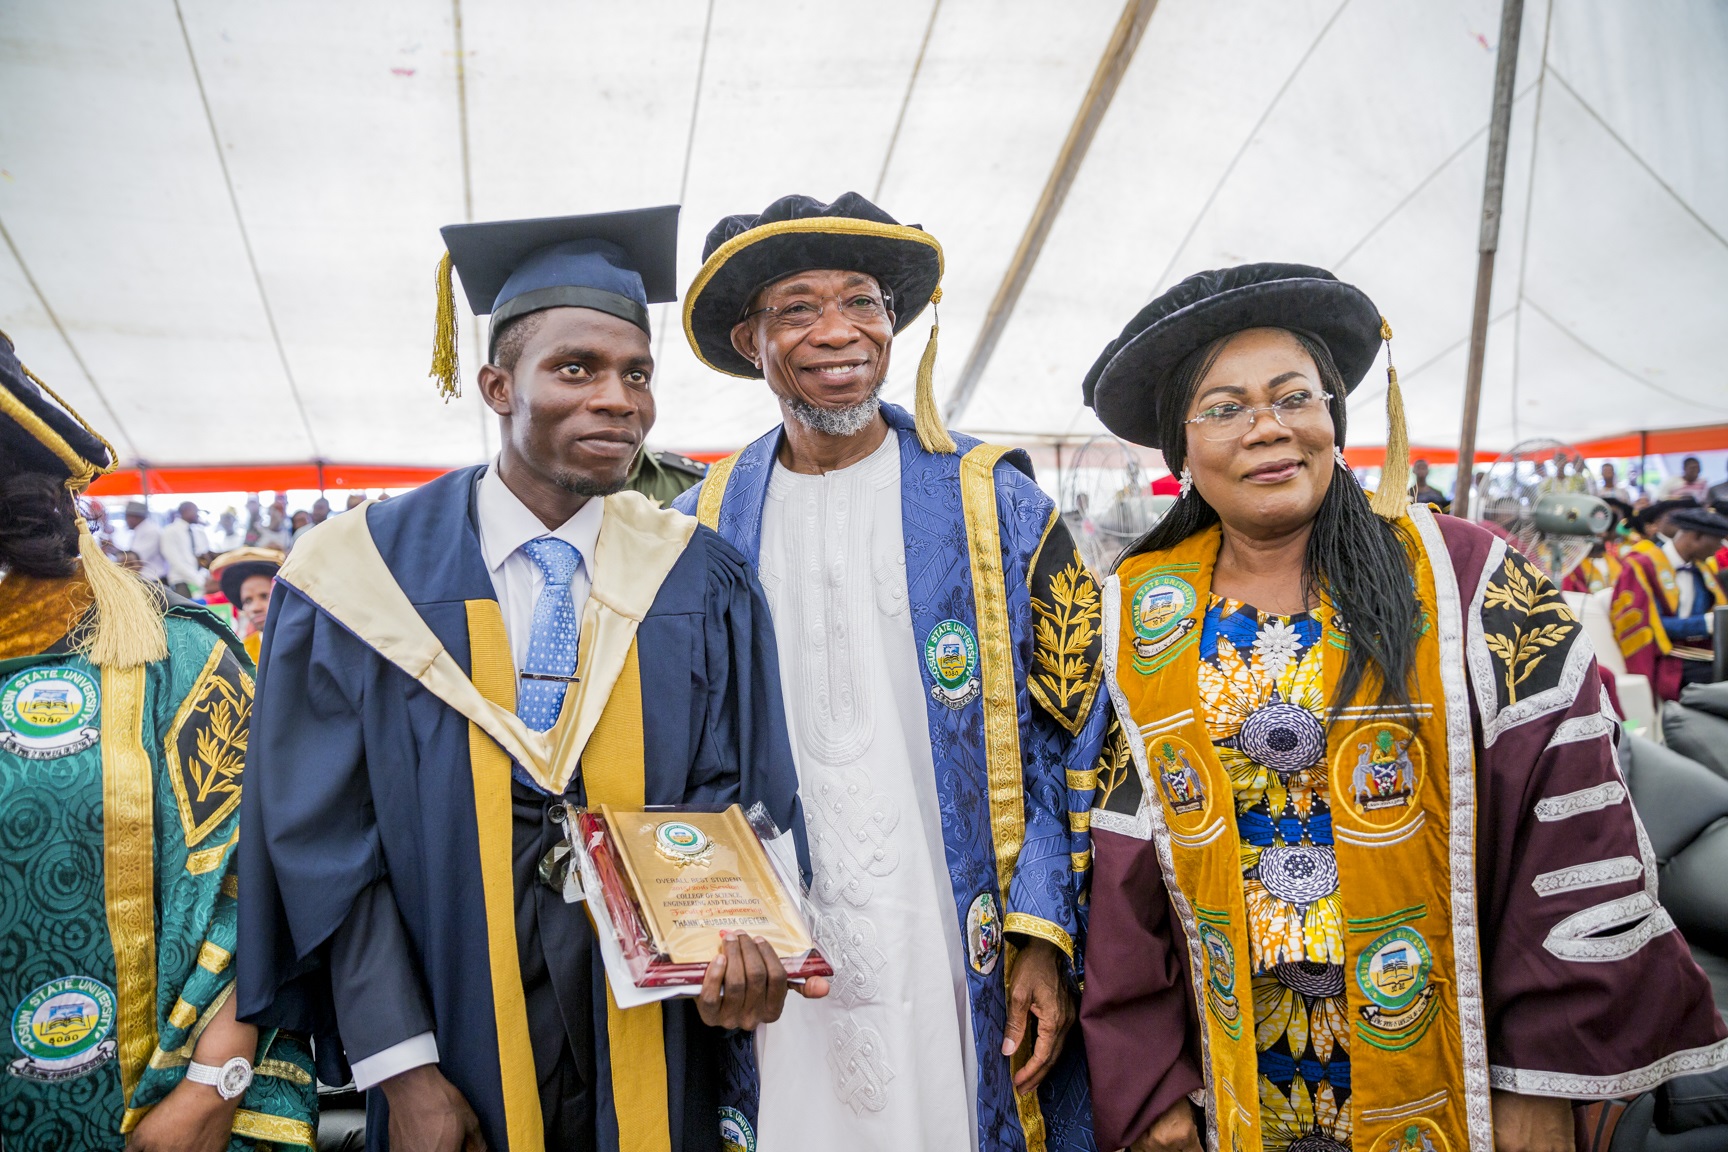 Gov. Aregbesola At The 10th Convocation Ceremony At UniOsun (Photos)